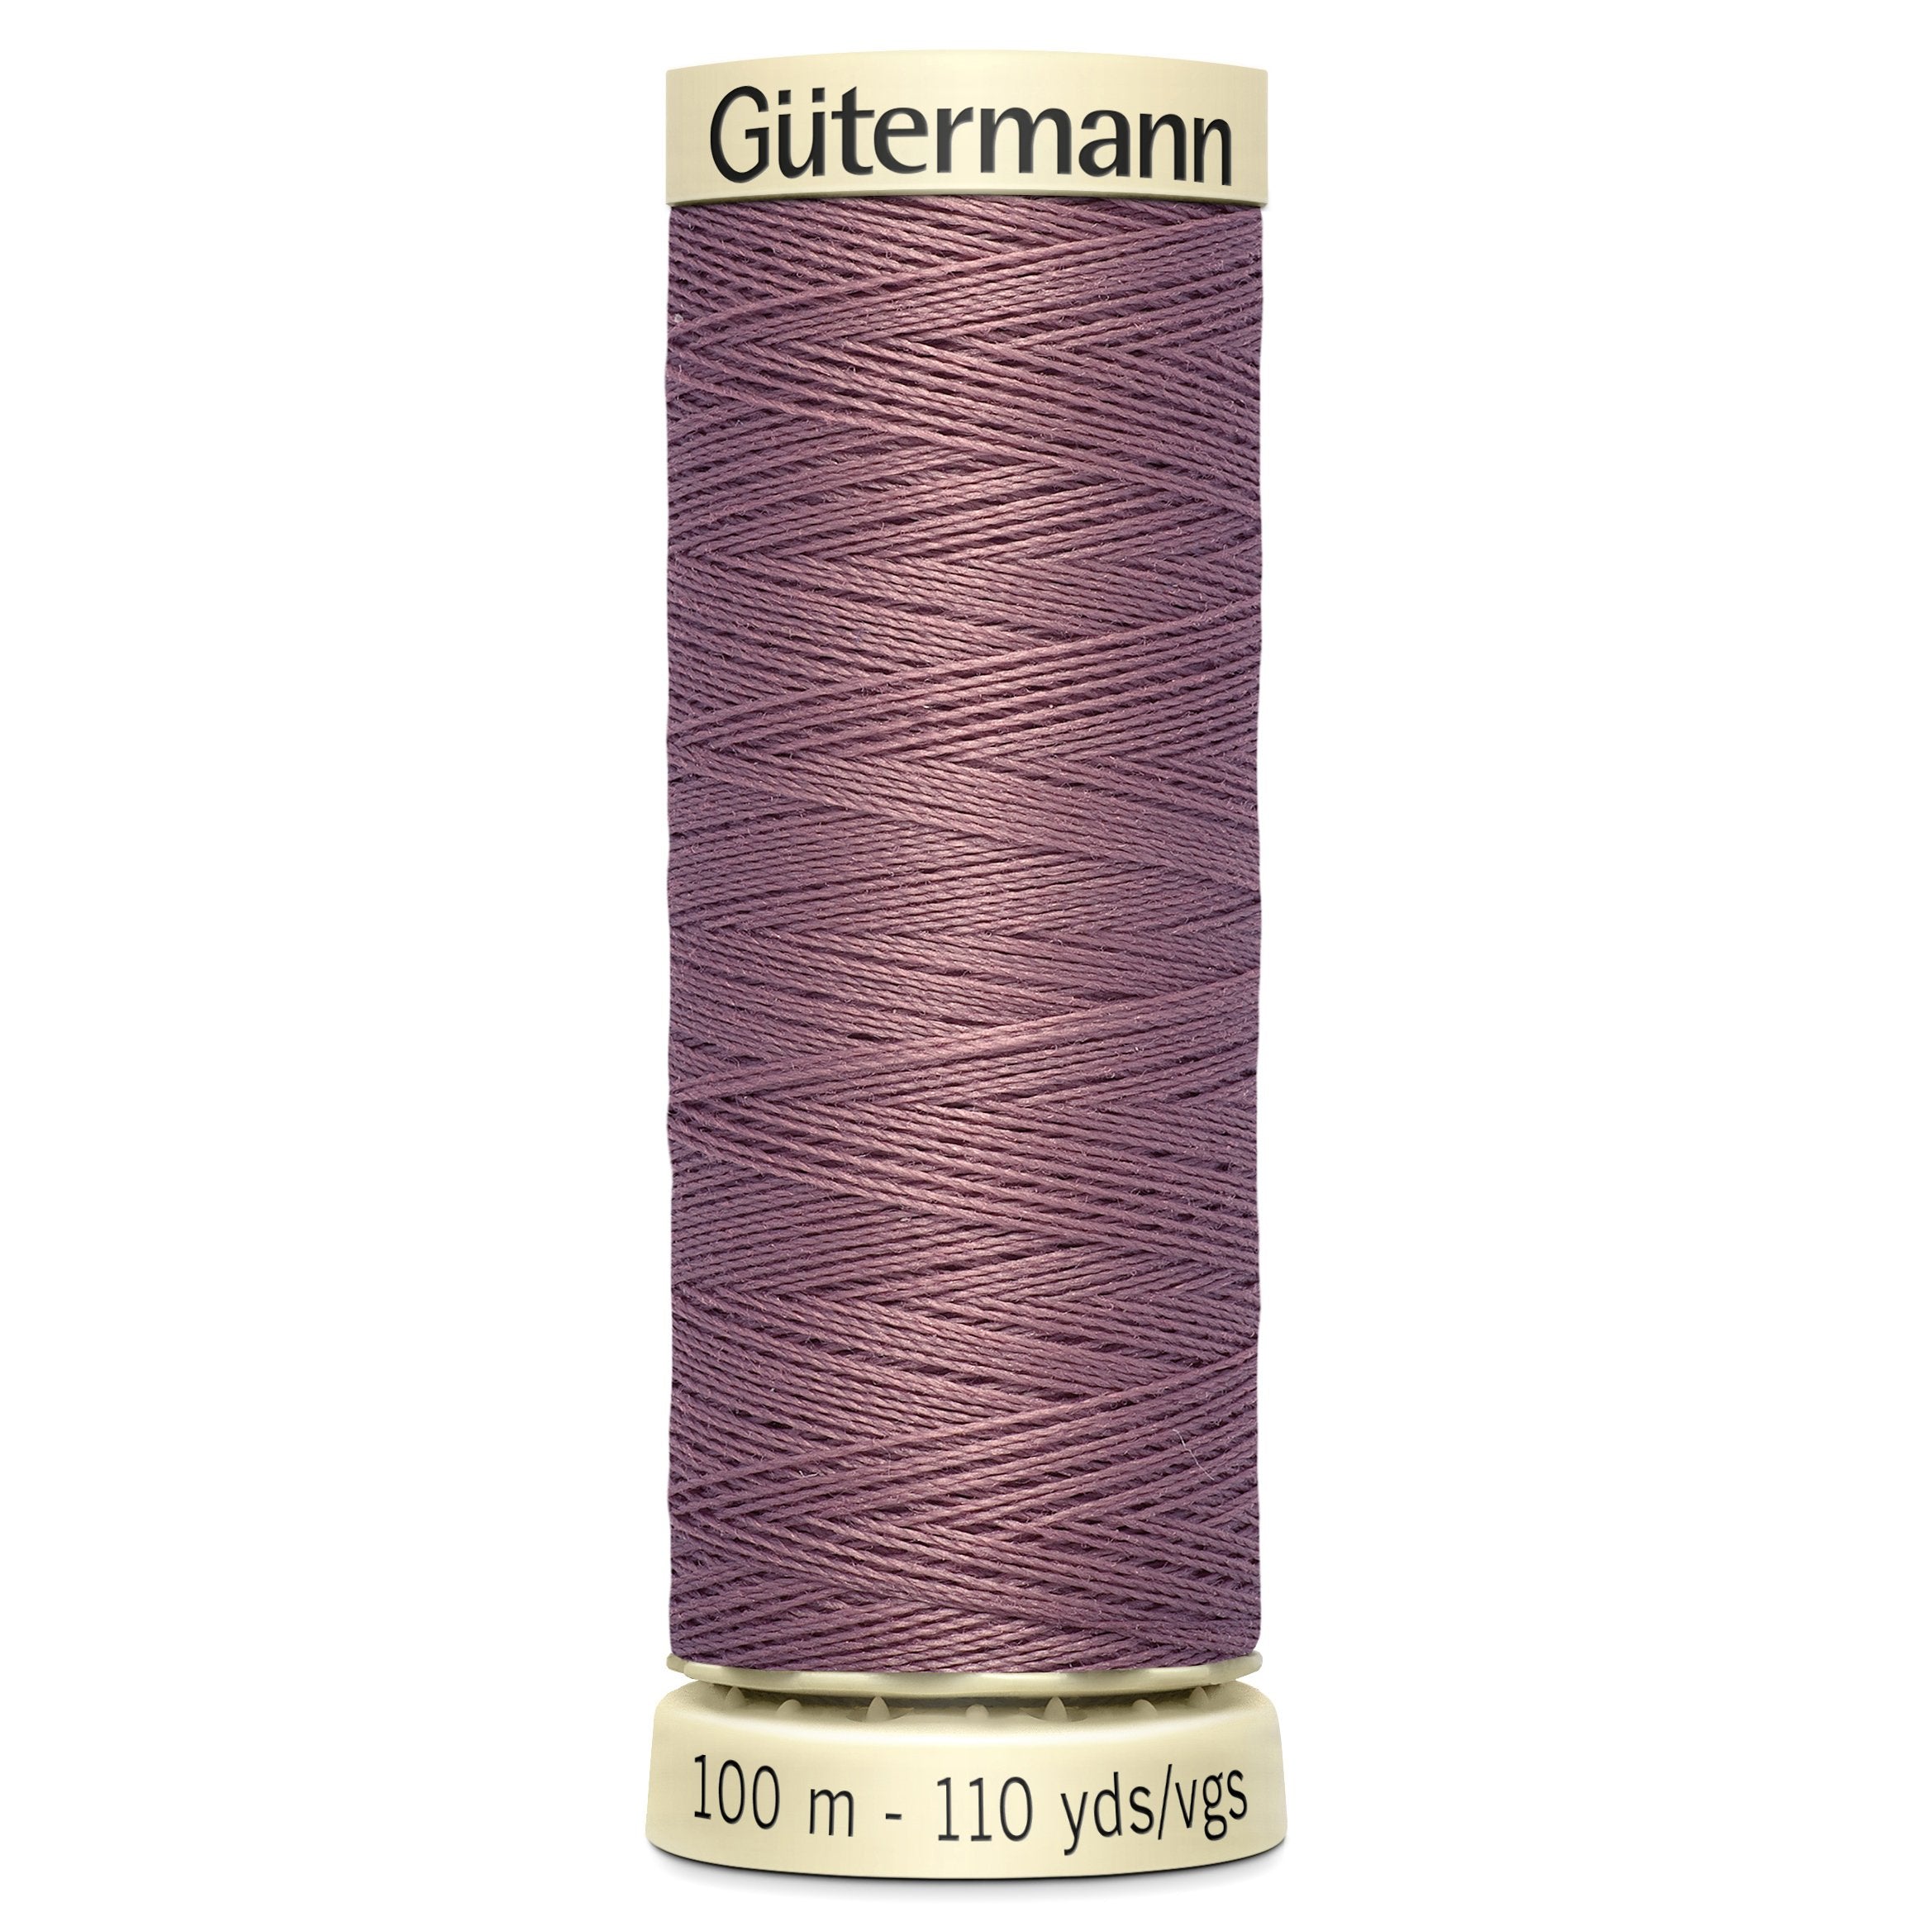 Gutermann Sew All Thread colour 52 Mink from Jaycotts Sewing Supplies